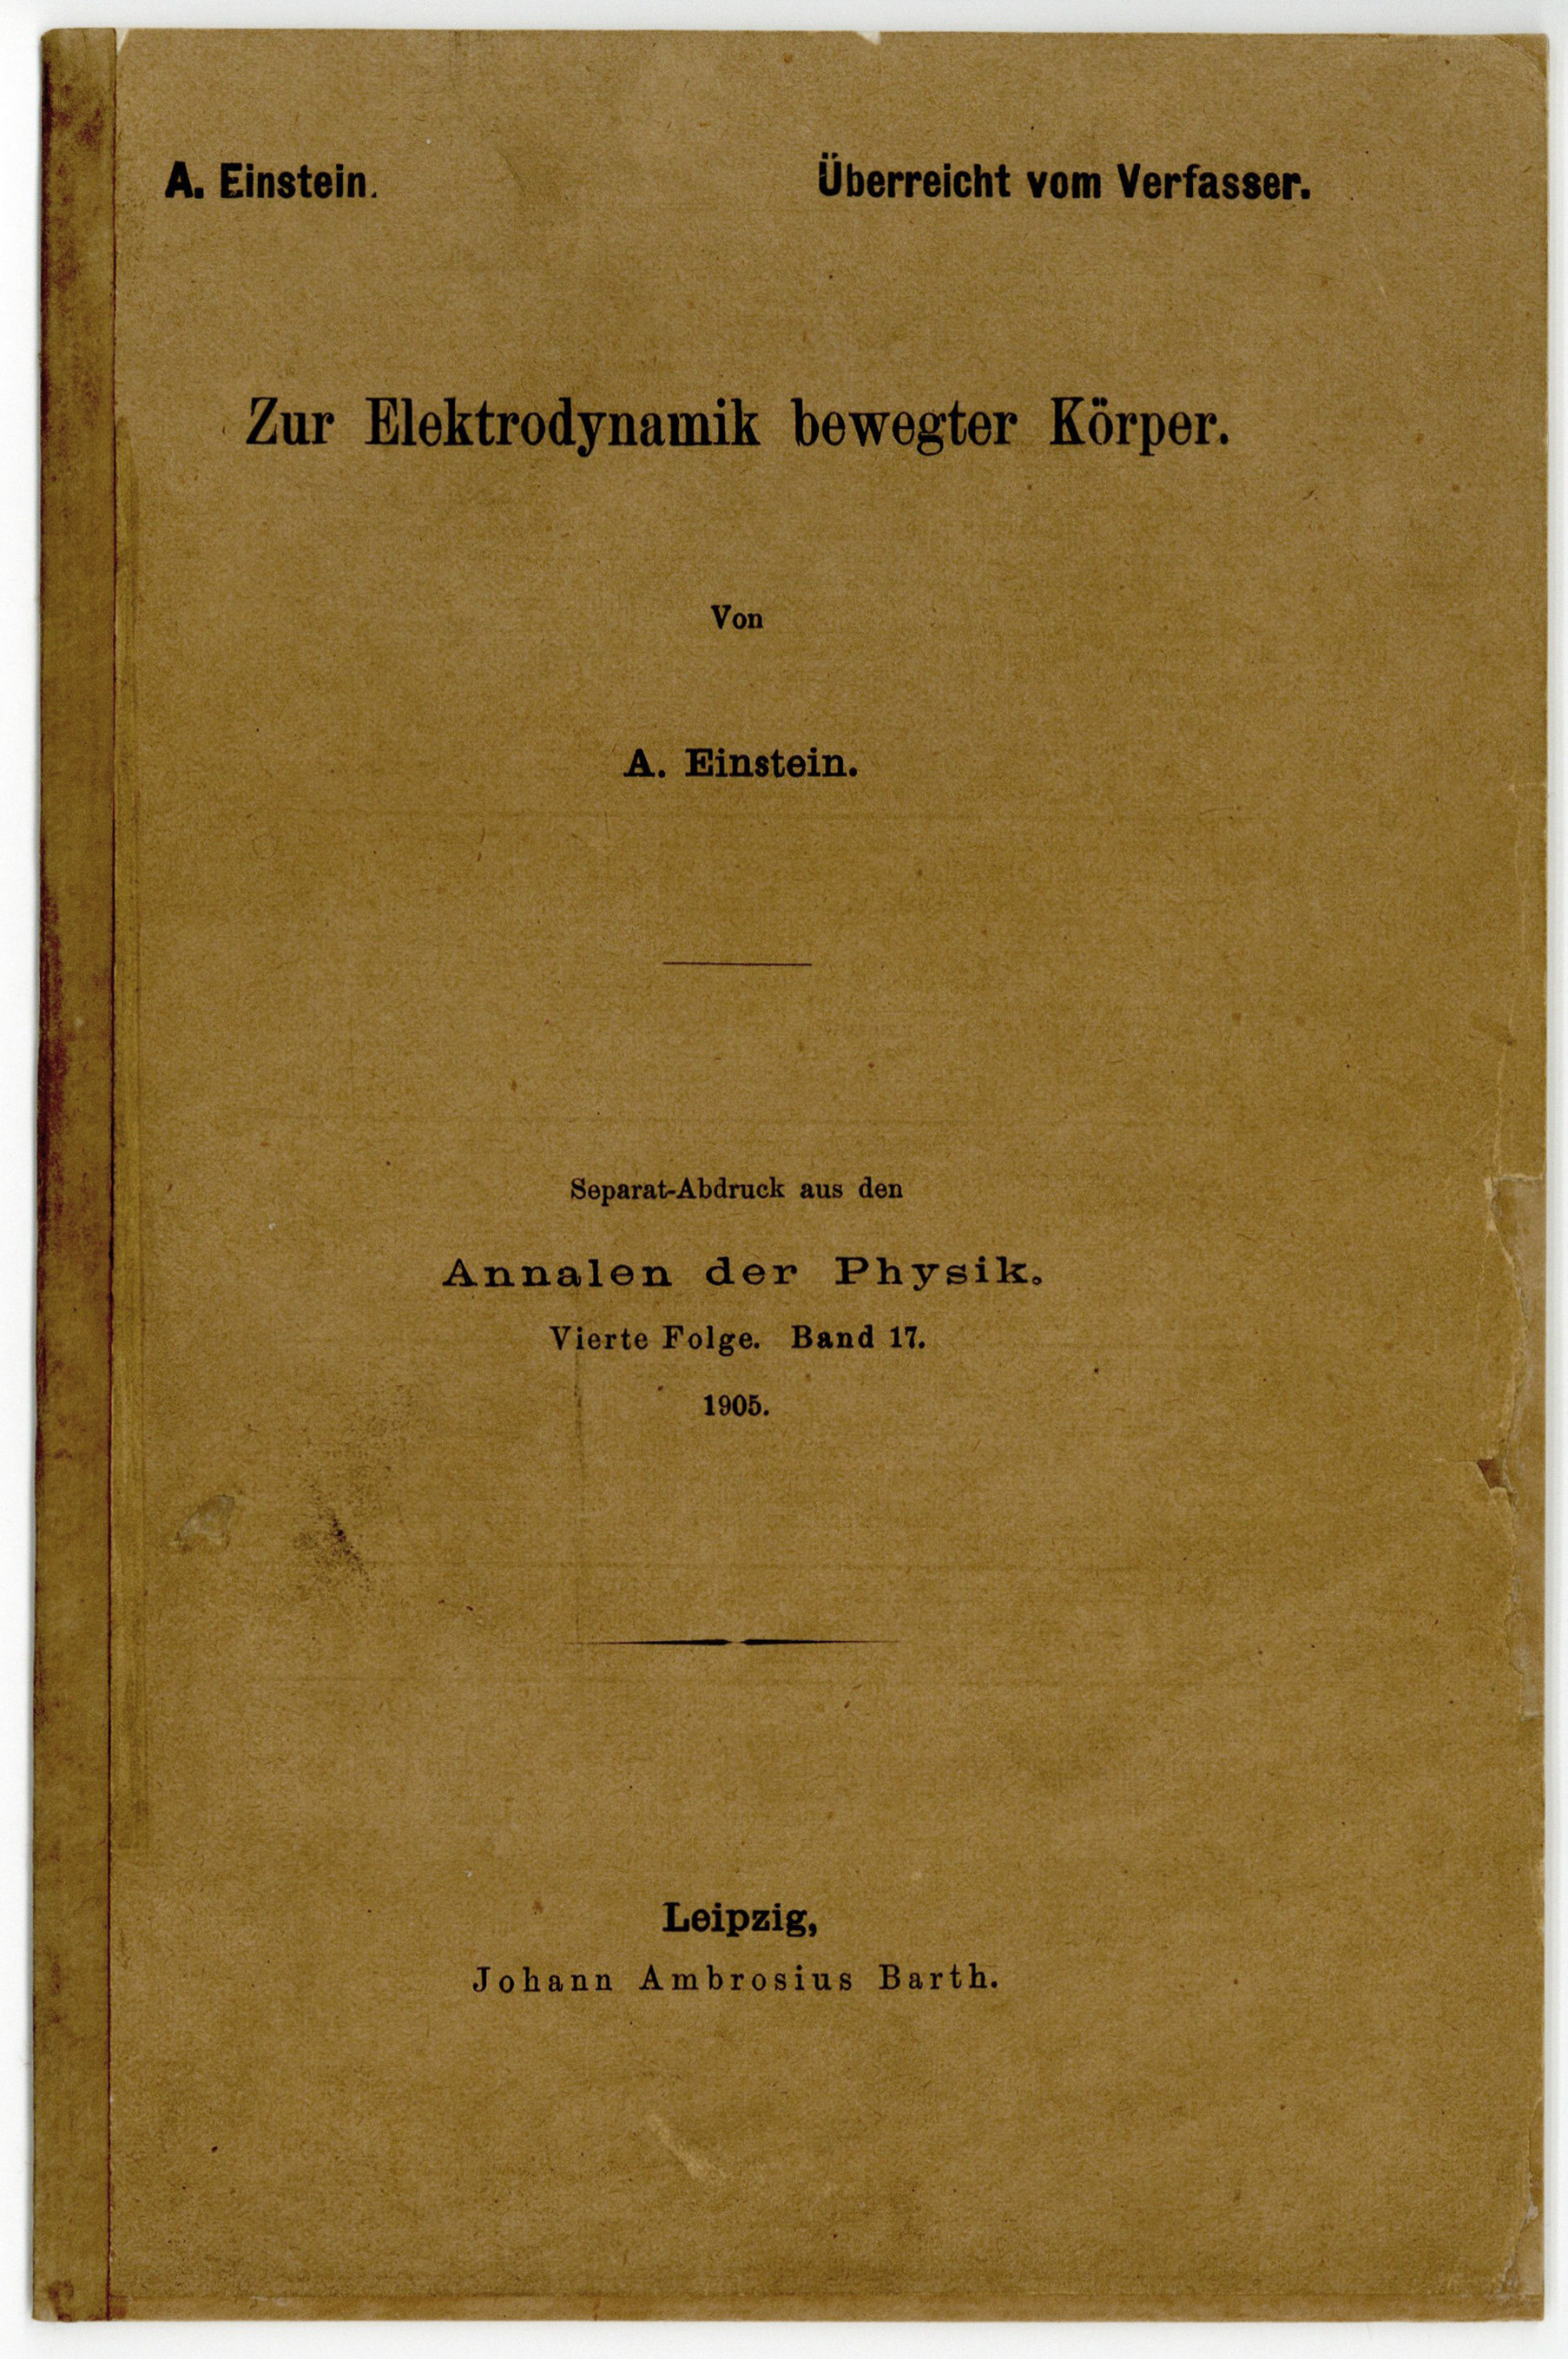 Upper cover of the offprint of Einstein's paper on special relativity.